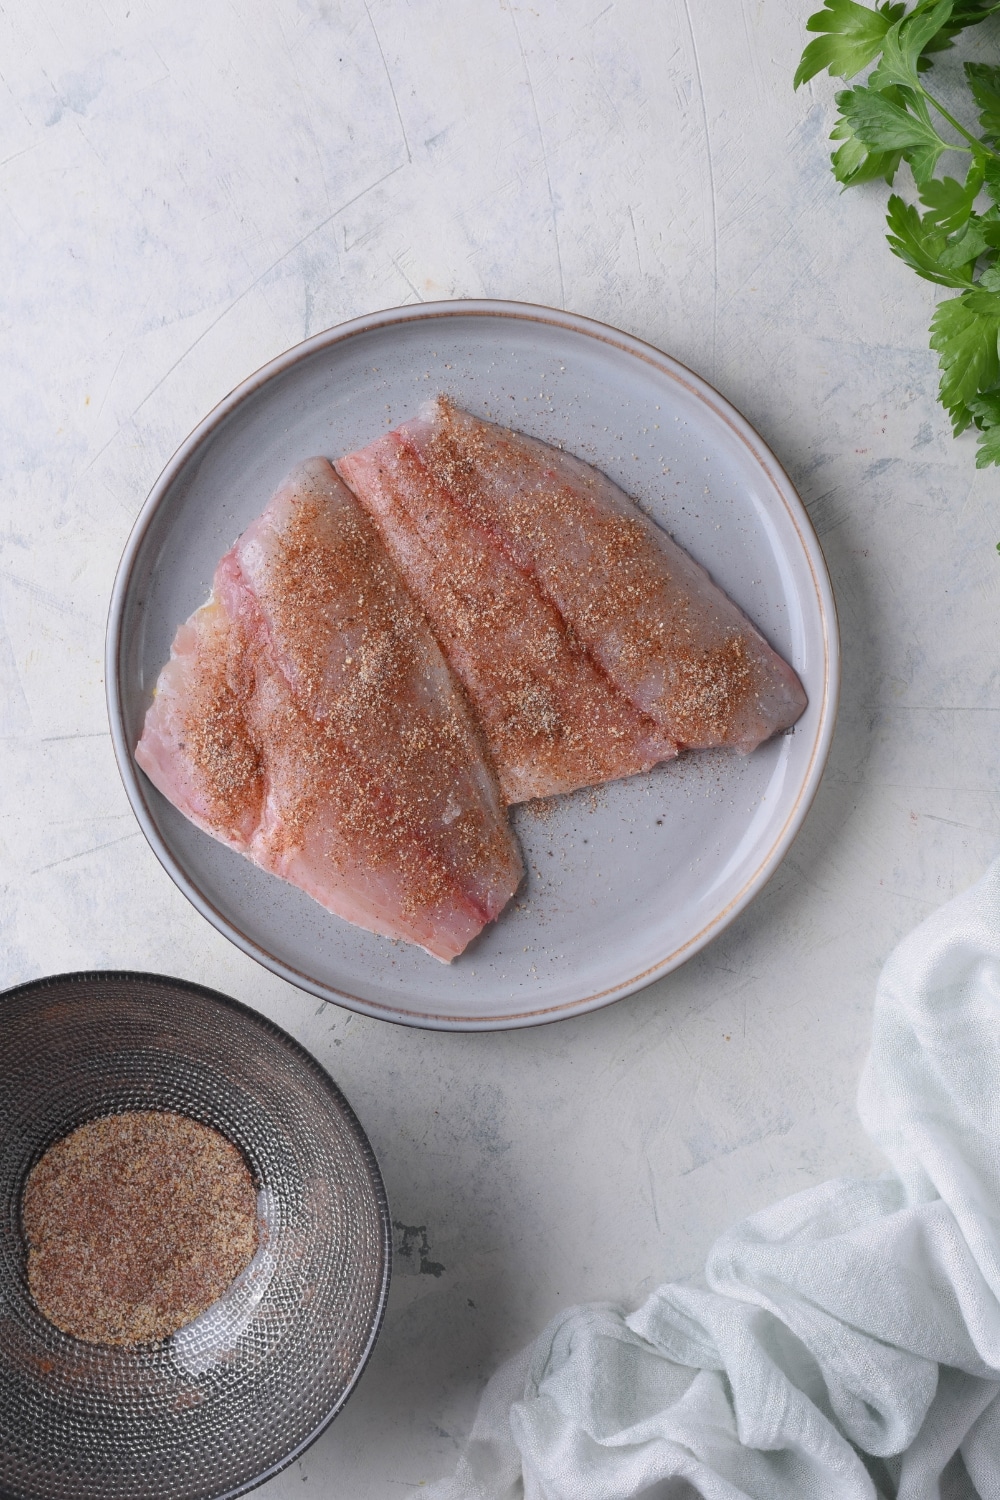 A pair of seasoned raw tilapia filets on a plate. Next to the plate is a bowl of mixed seasonings.